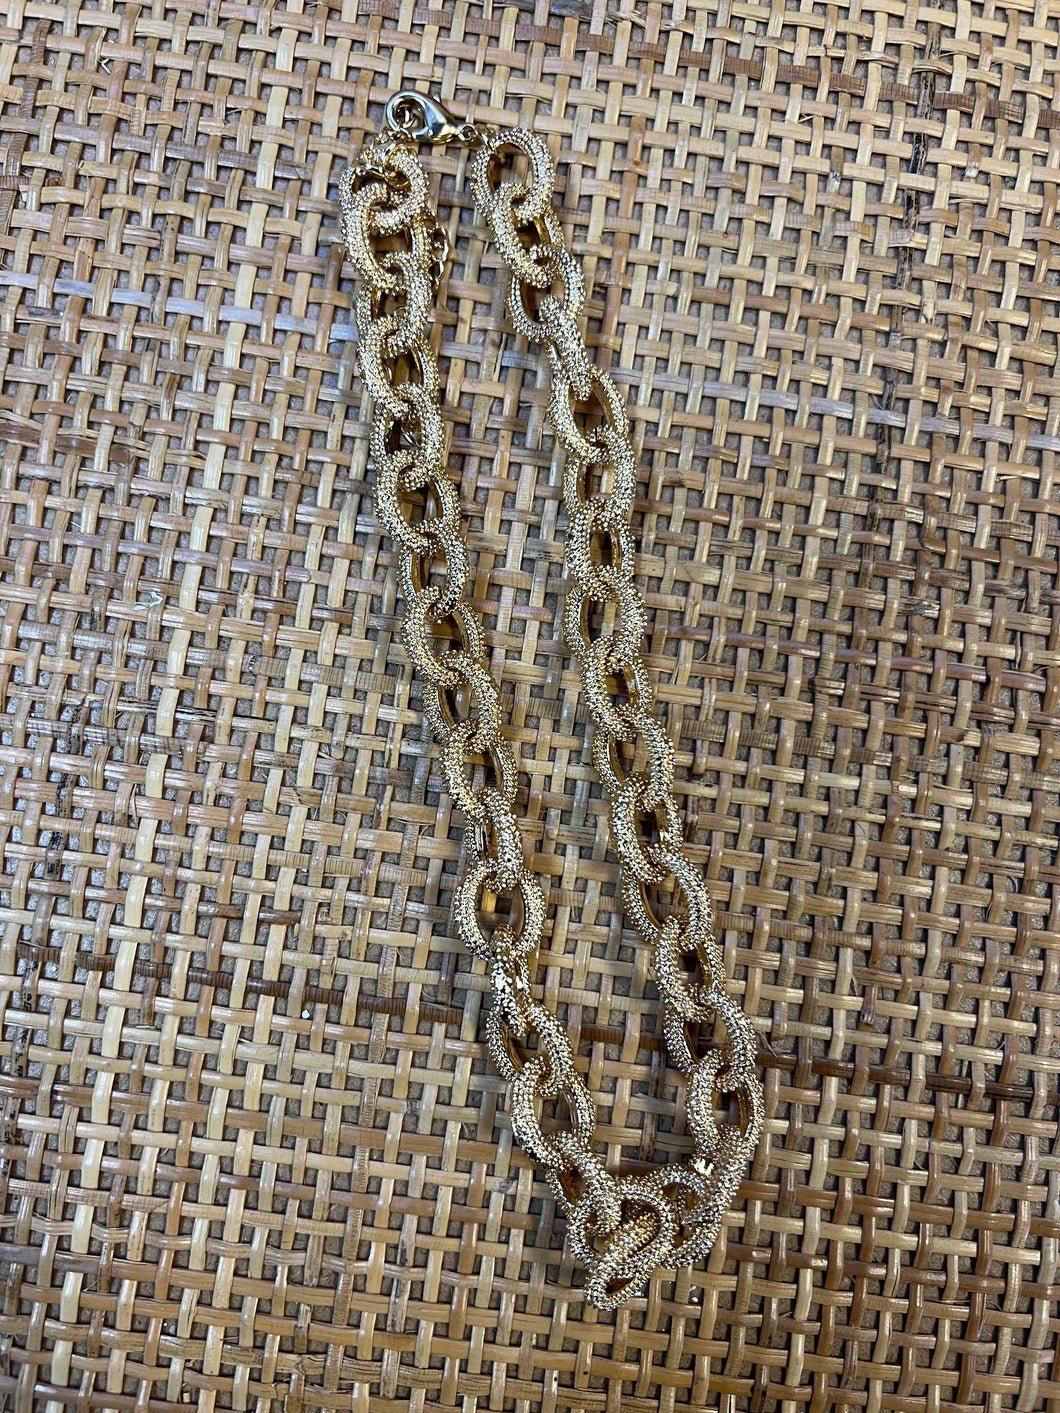 Textured Chain Necklace